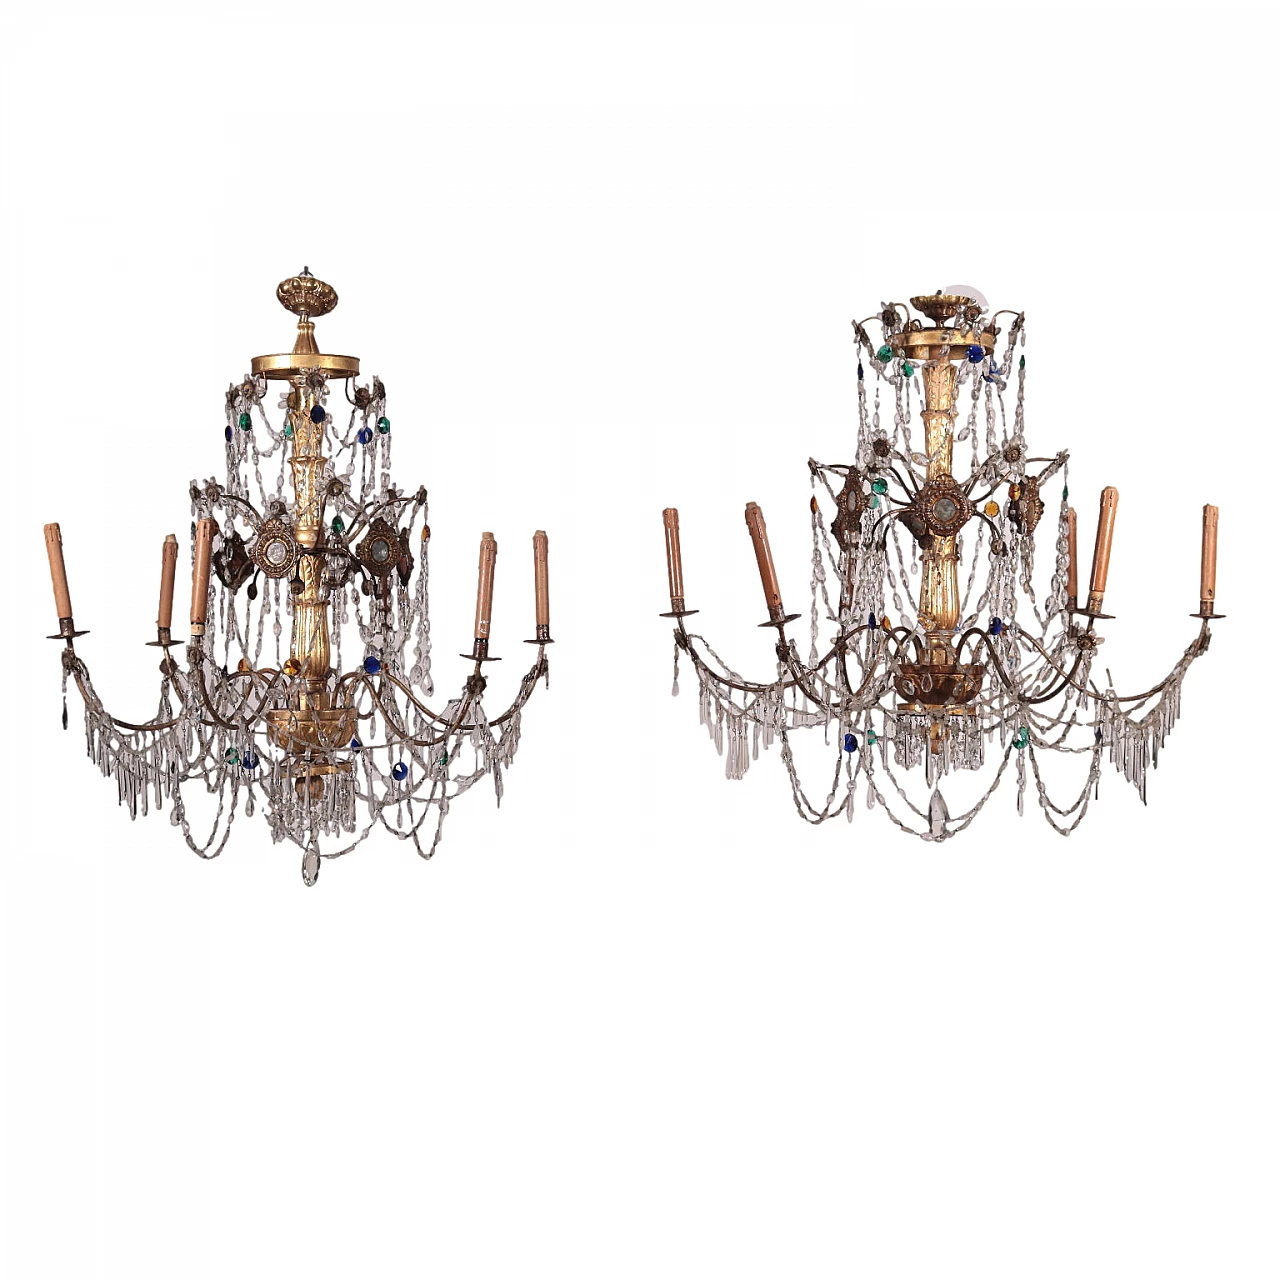 Pair of neoclassical 6-light chandeliers, 18th century 1